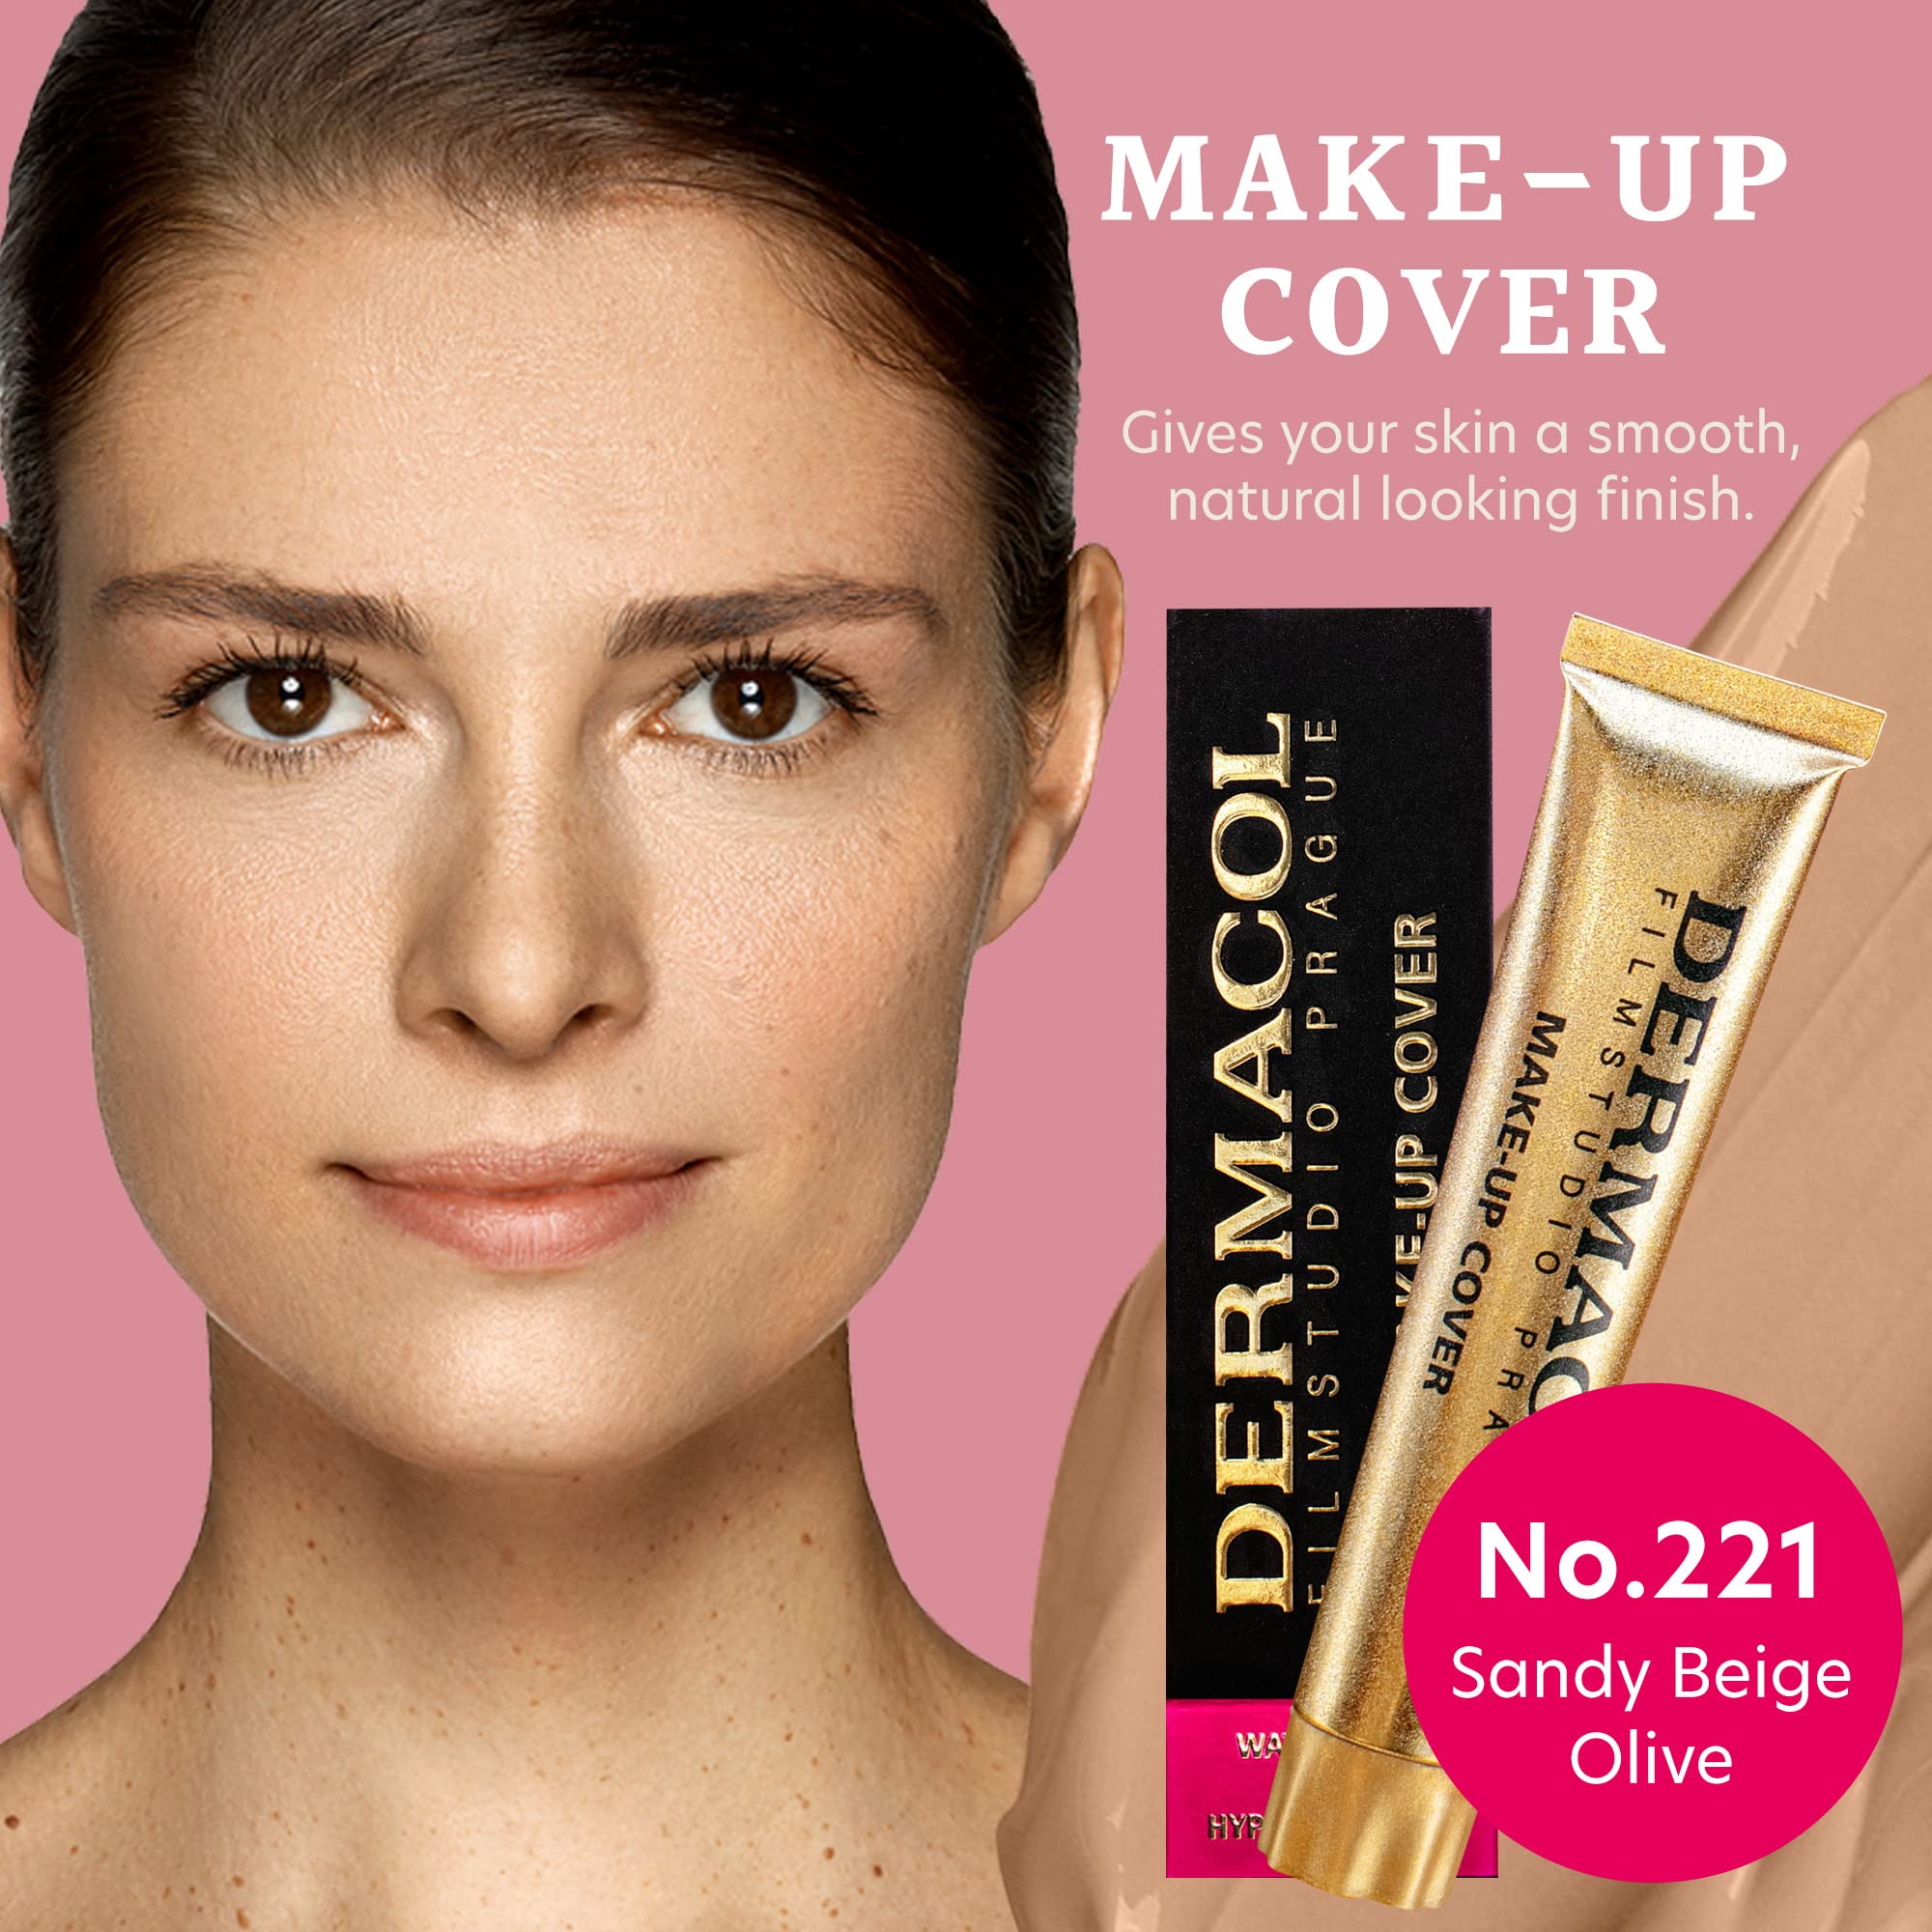 Dermacol - Full Coverage Foundation, Liquid Makeup Matte Foundation with SPF 30, Waterproof Foundation for Oily Skin, Acne, & Under Eye Bags, Long-Lasting Makeup Products, 30g, Shade 221